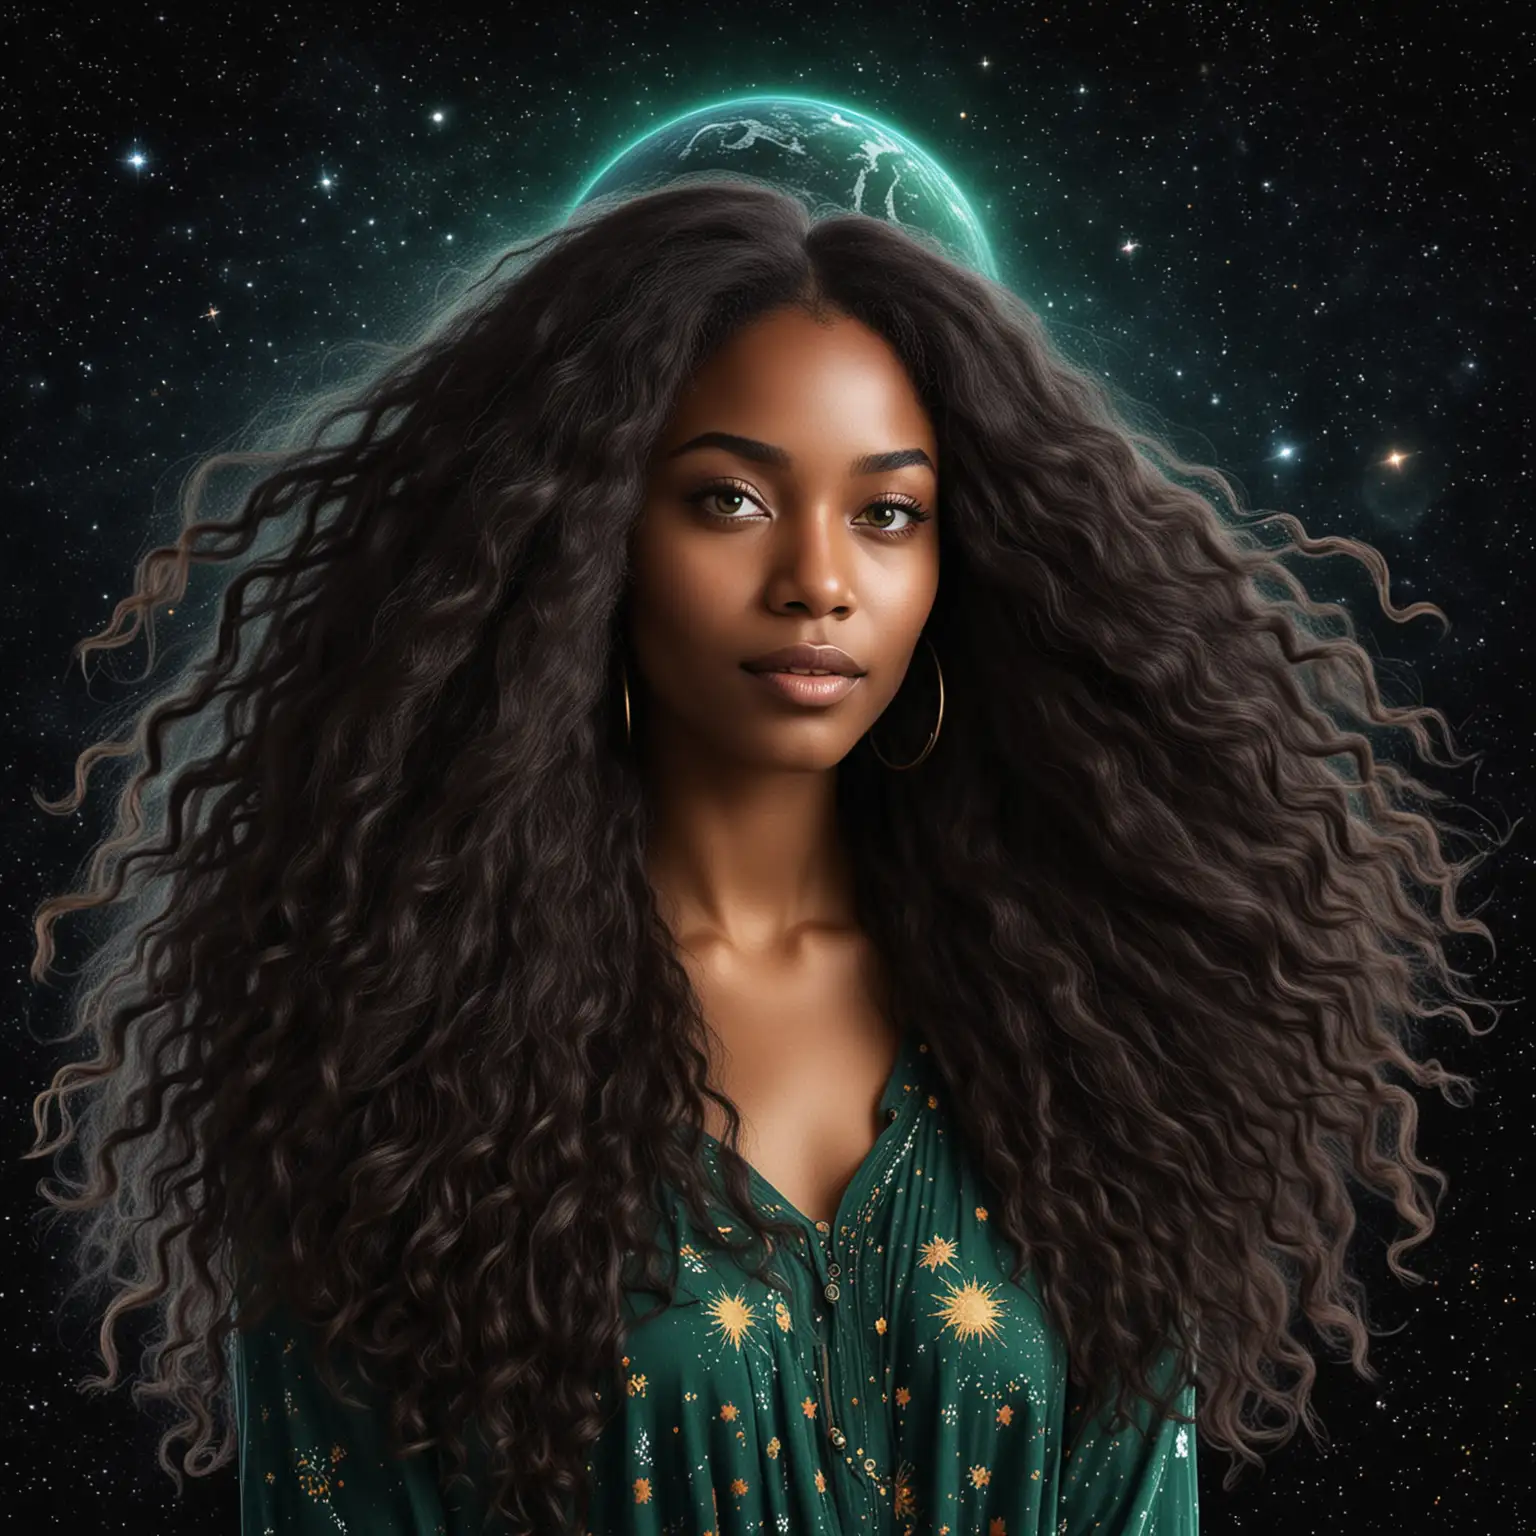 Beautiful black woman with long flowing hair. She has green eyes.  She is surrounded by the cosmos  in outer space There are stars and planets against a black background. she is dressed bohemian style. This is a png graphic